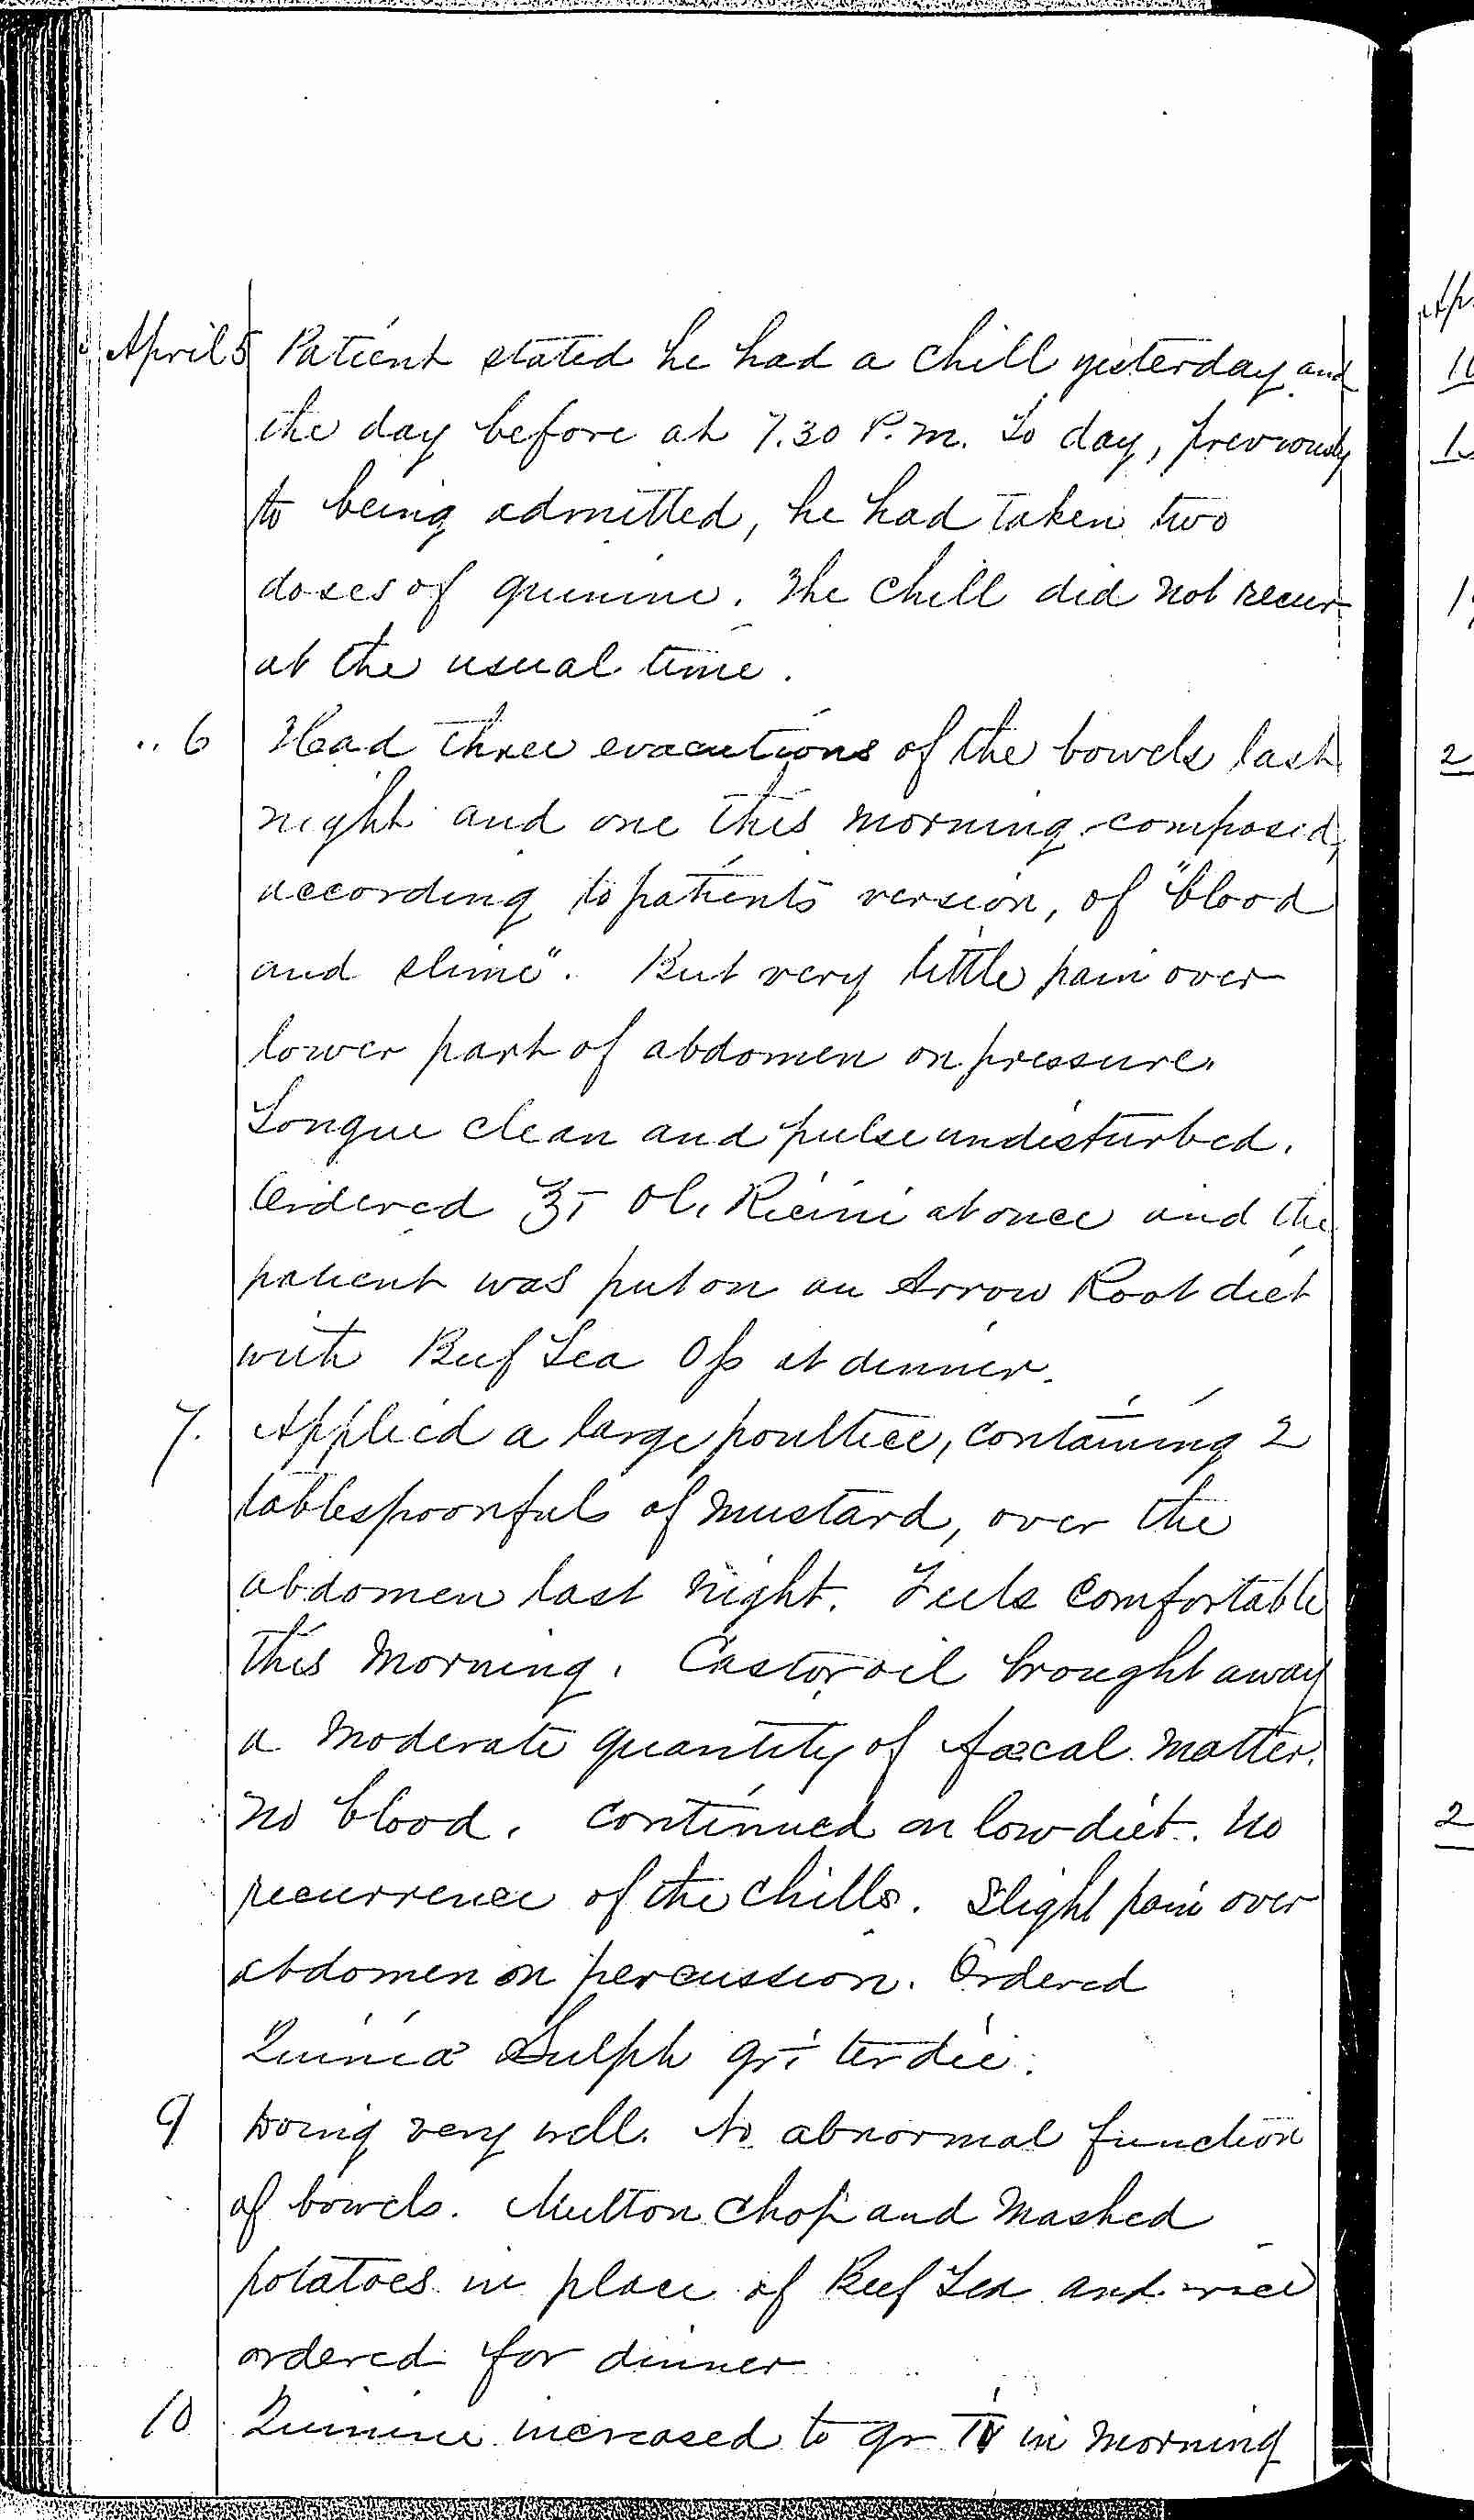 Entry for Thomas W. Coulter (page 2 of 3) in the log Hospital Tickets and Case Papers - Naval Hospital - Washington, D.C. - 1868-69